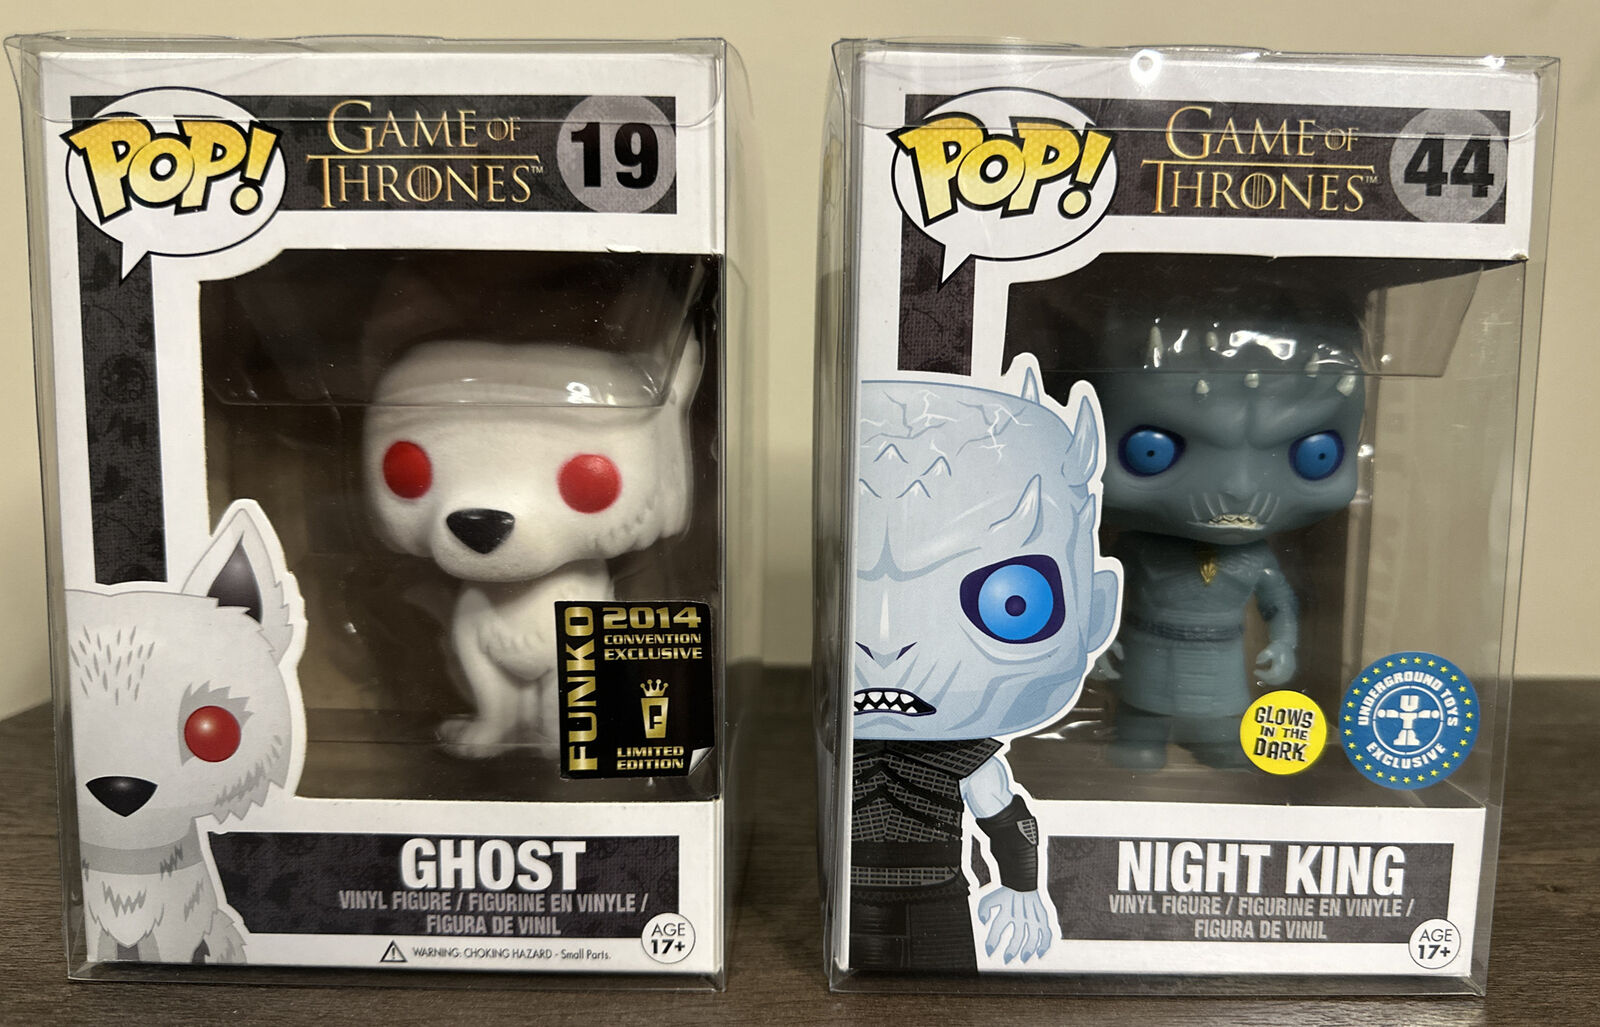 Game of Thrones Ghost 2014 Convention And Night King Underground Toys Exclusives